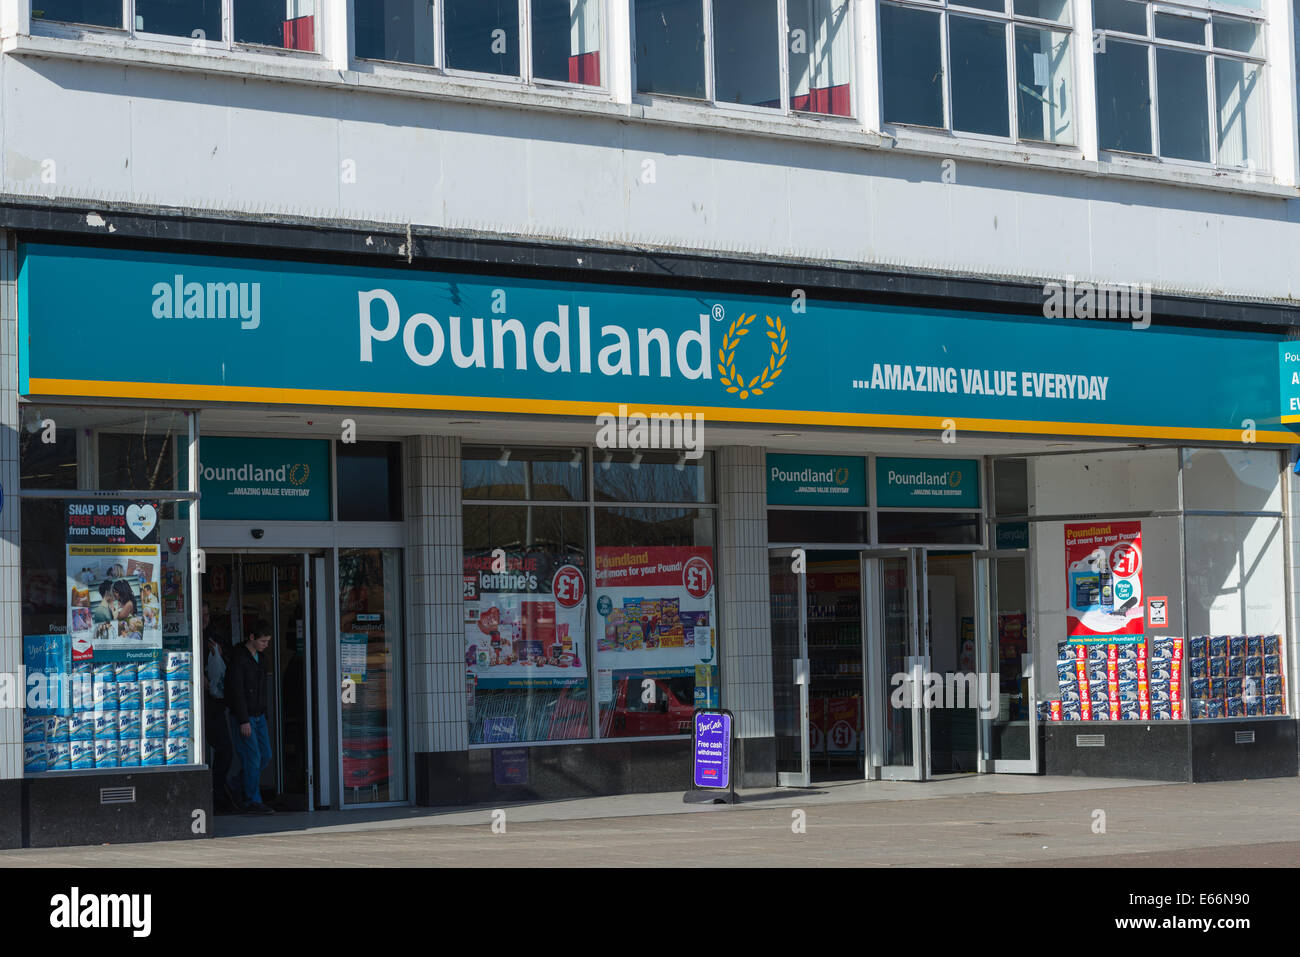 Poundland discount store in Great Yarmouth, England Stock Photo